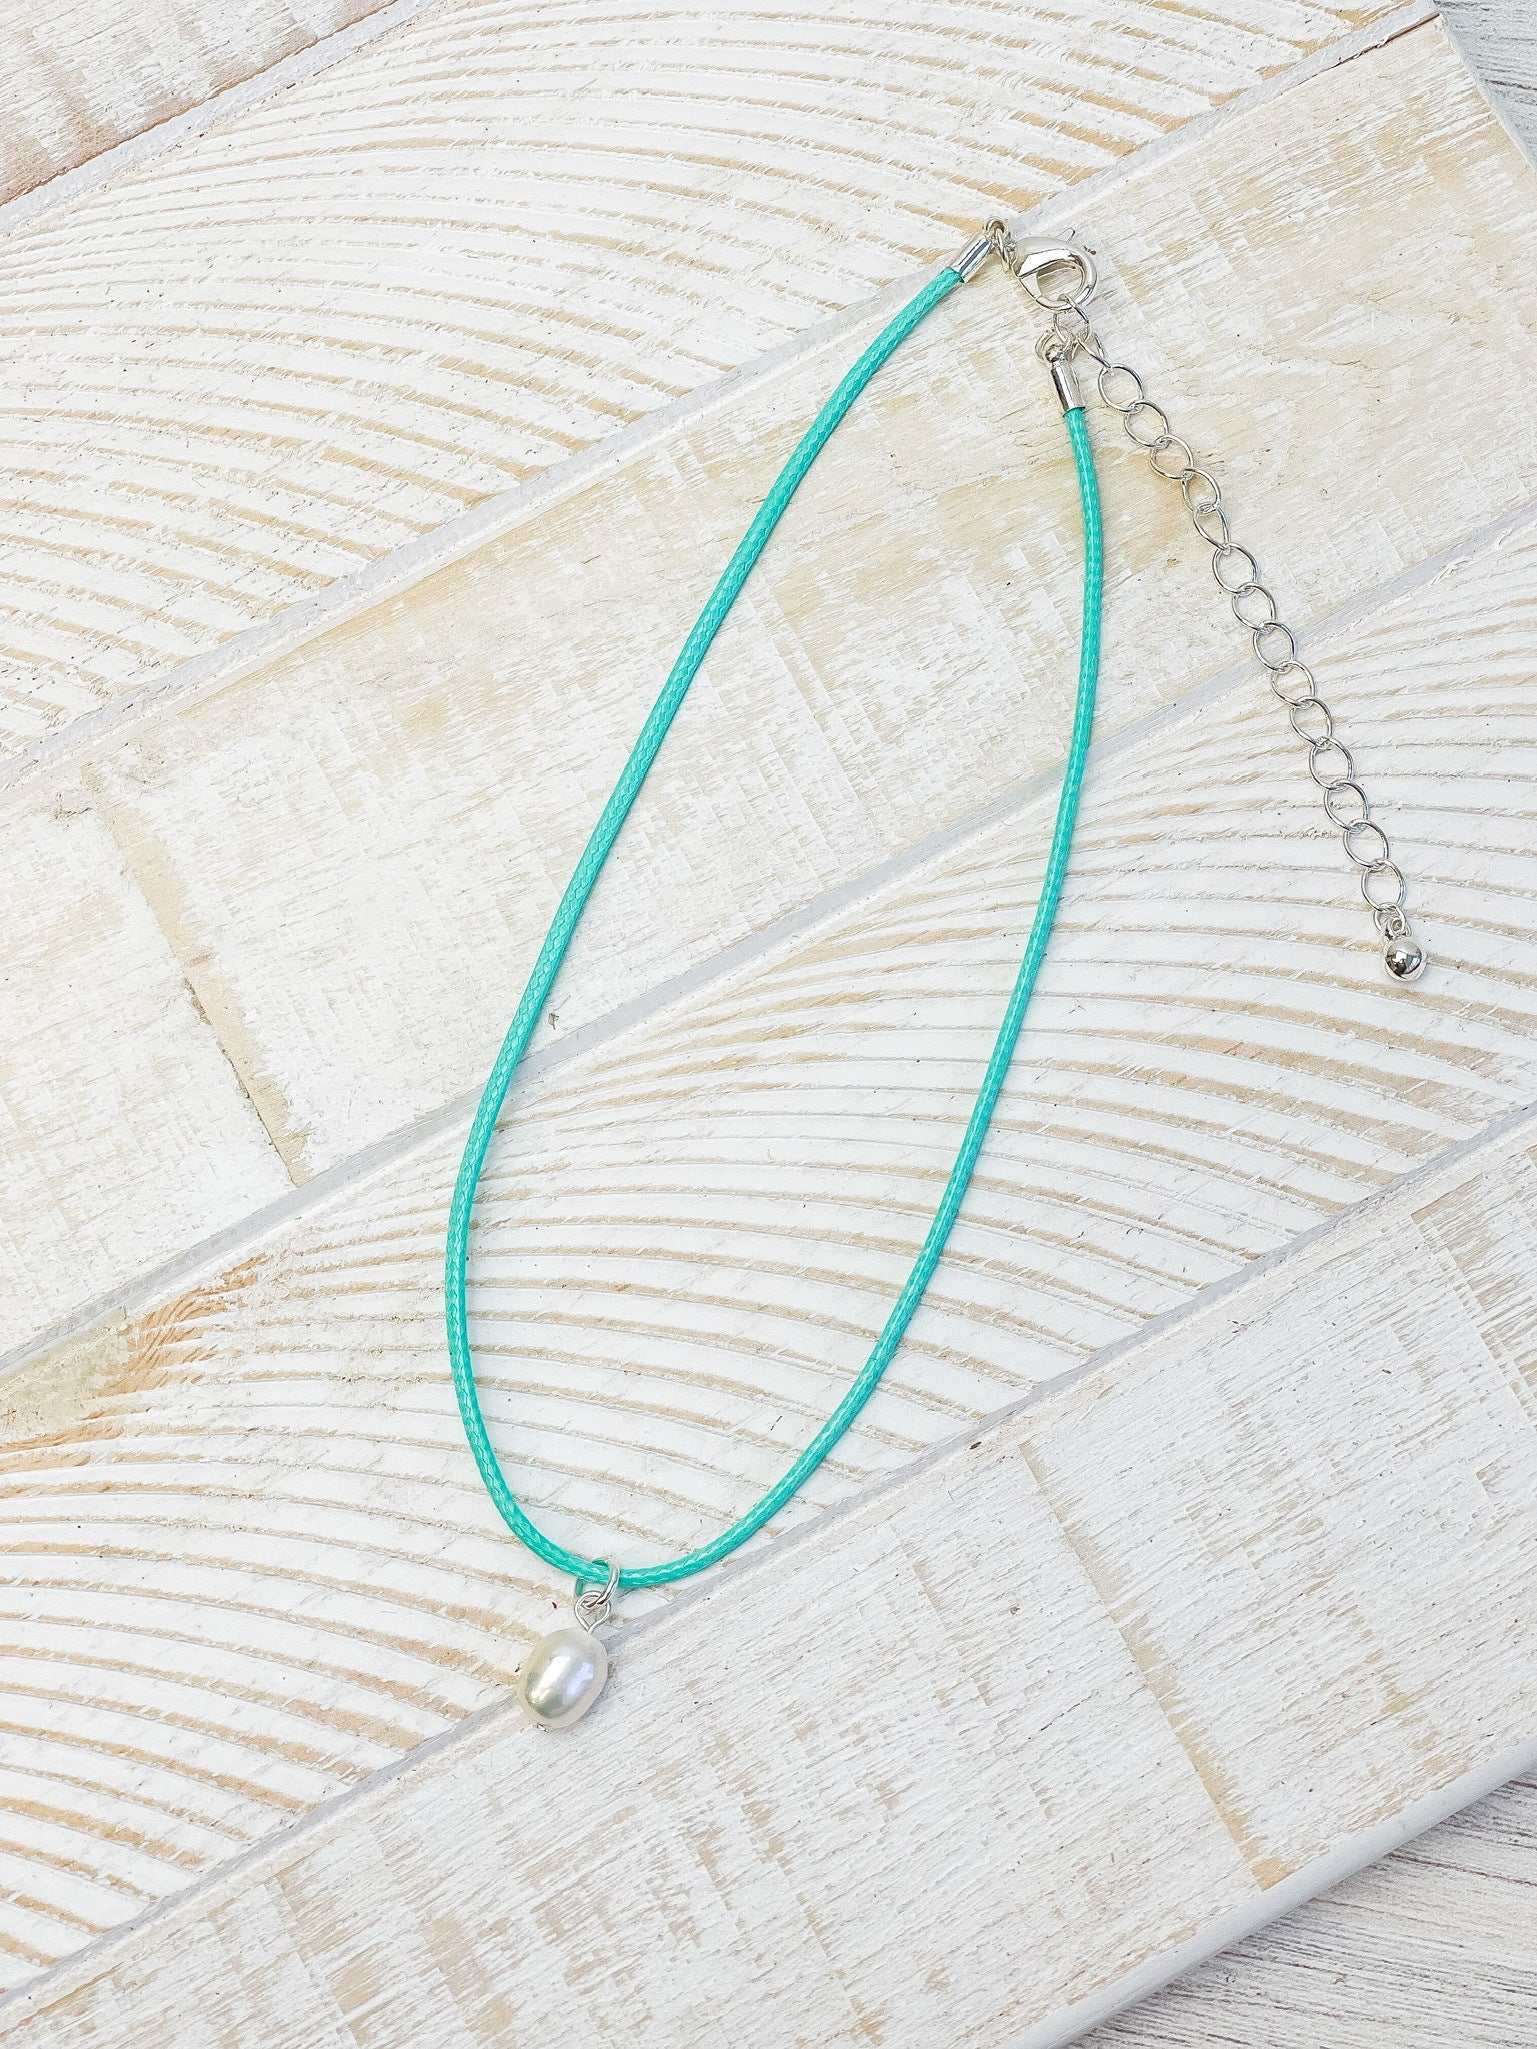 Single Pearl Leather Choker Necklace - Turquoise